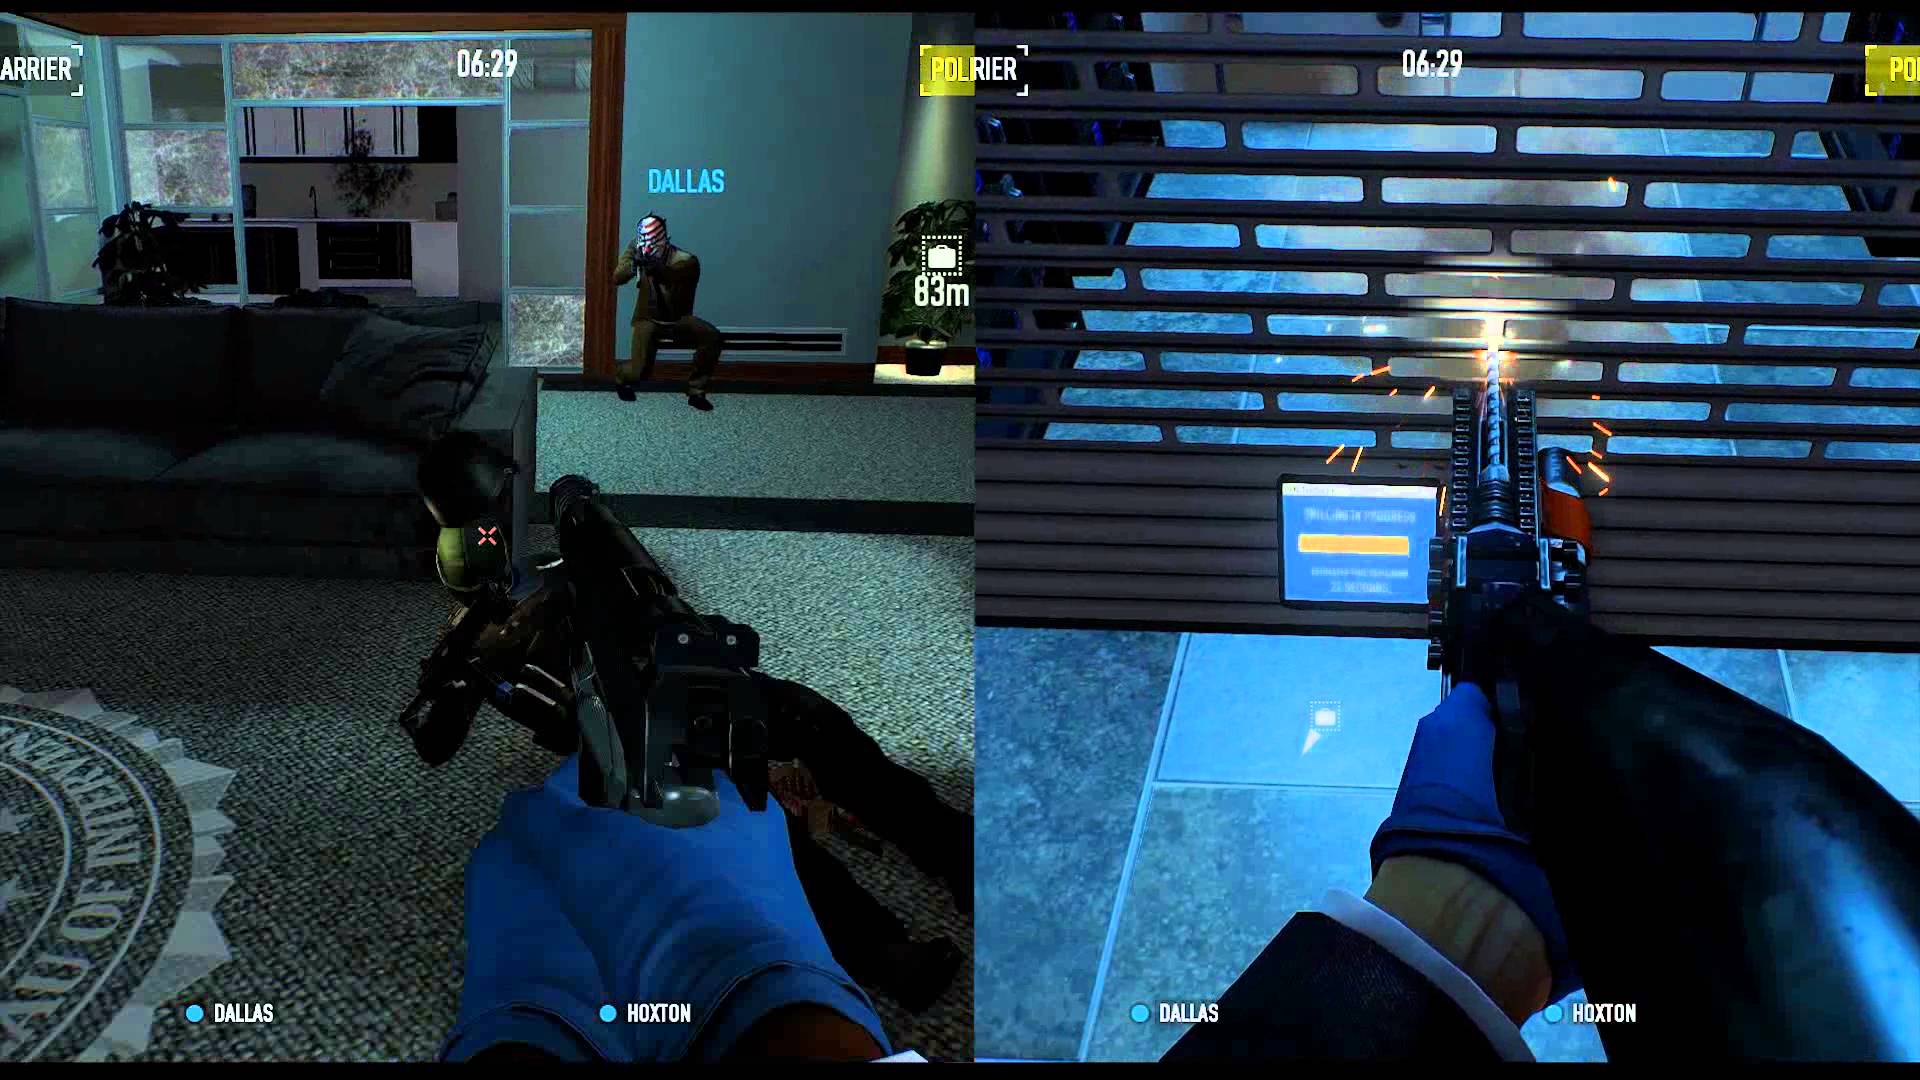 Ps3 split. Payday 2 сплит скрин. Payday 2 на ПС 3. Payday 2 Split Screen ps3. Payday 2 ps4.